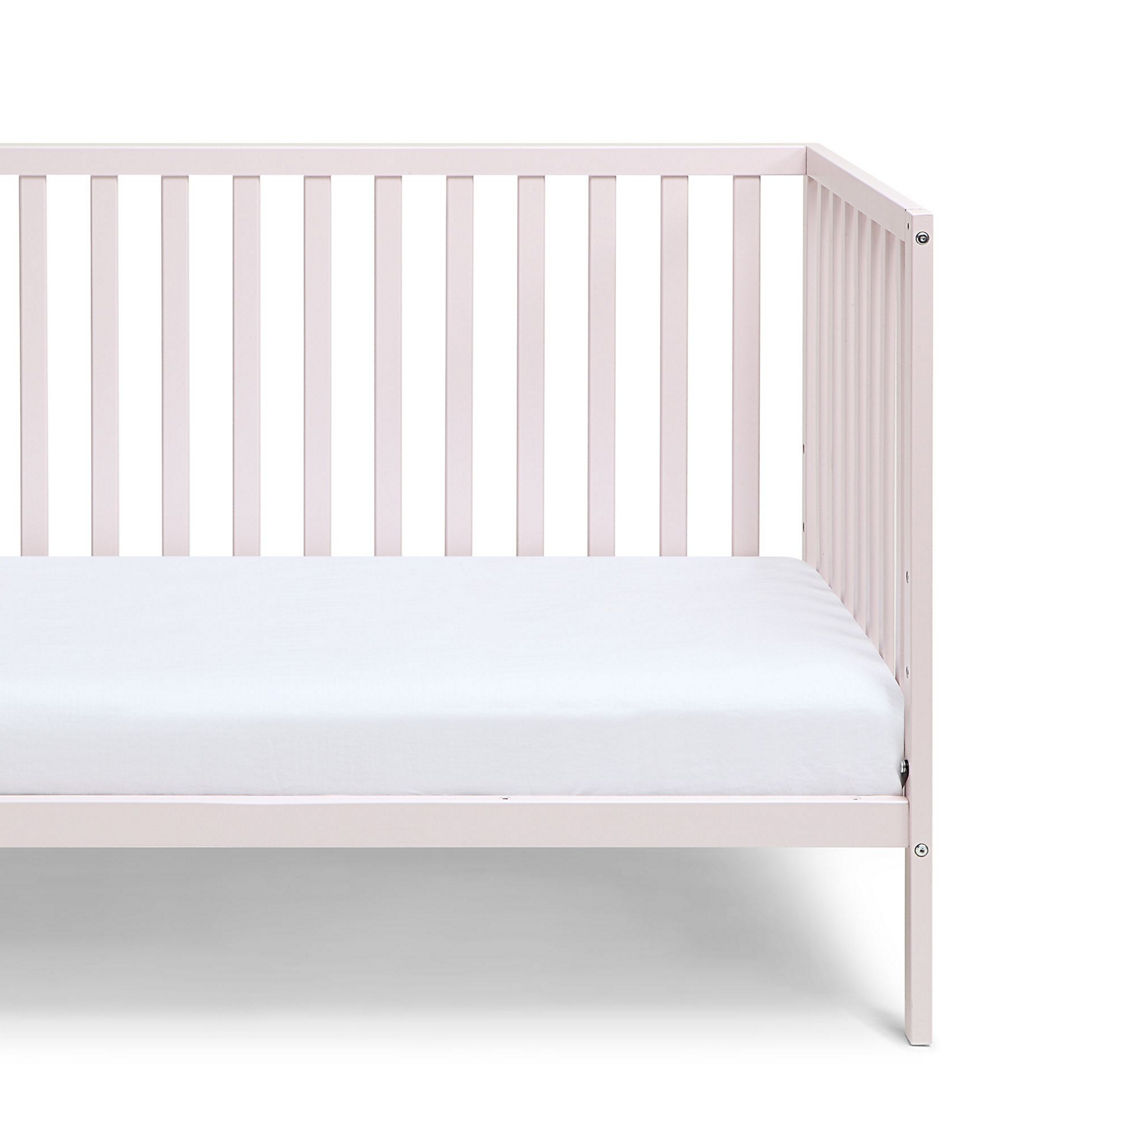 Suite Bebe Palmer 3-in-1 Convertible Island Crib Pastel Pink - Image 5 of 5